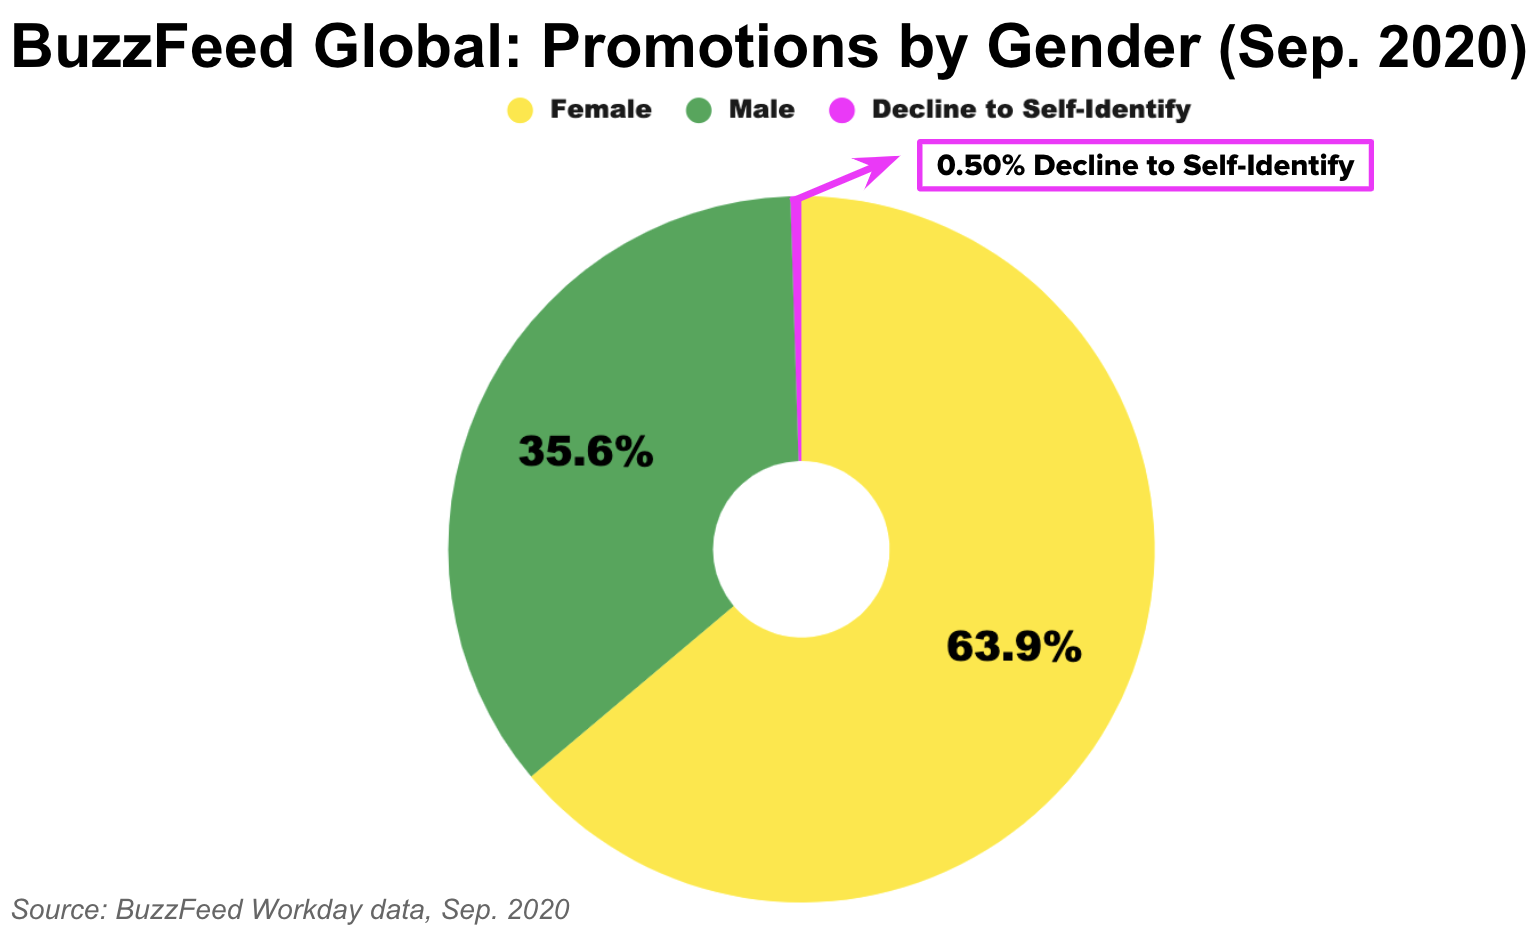 This is a pie chart depicting BuzzFeed&#x27;s promotion rate by gender based on data from September 2020.